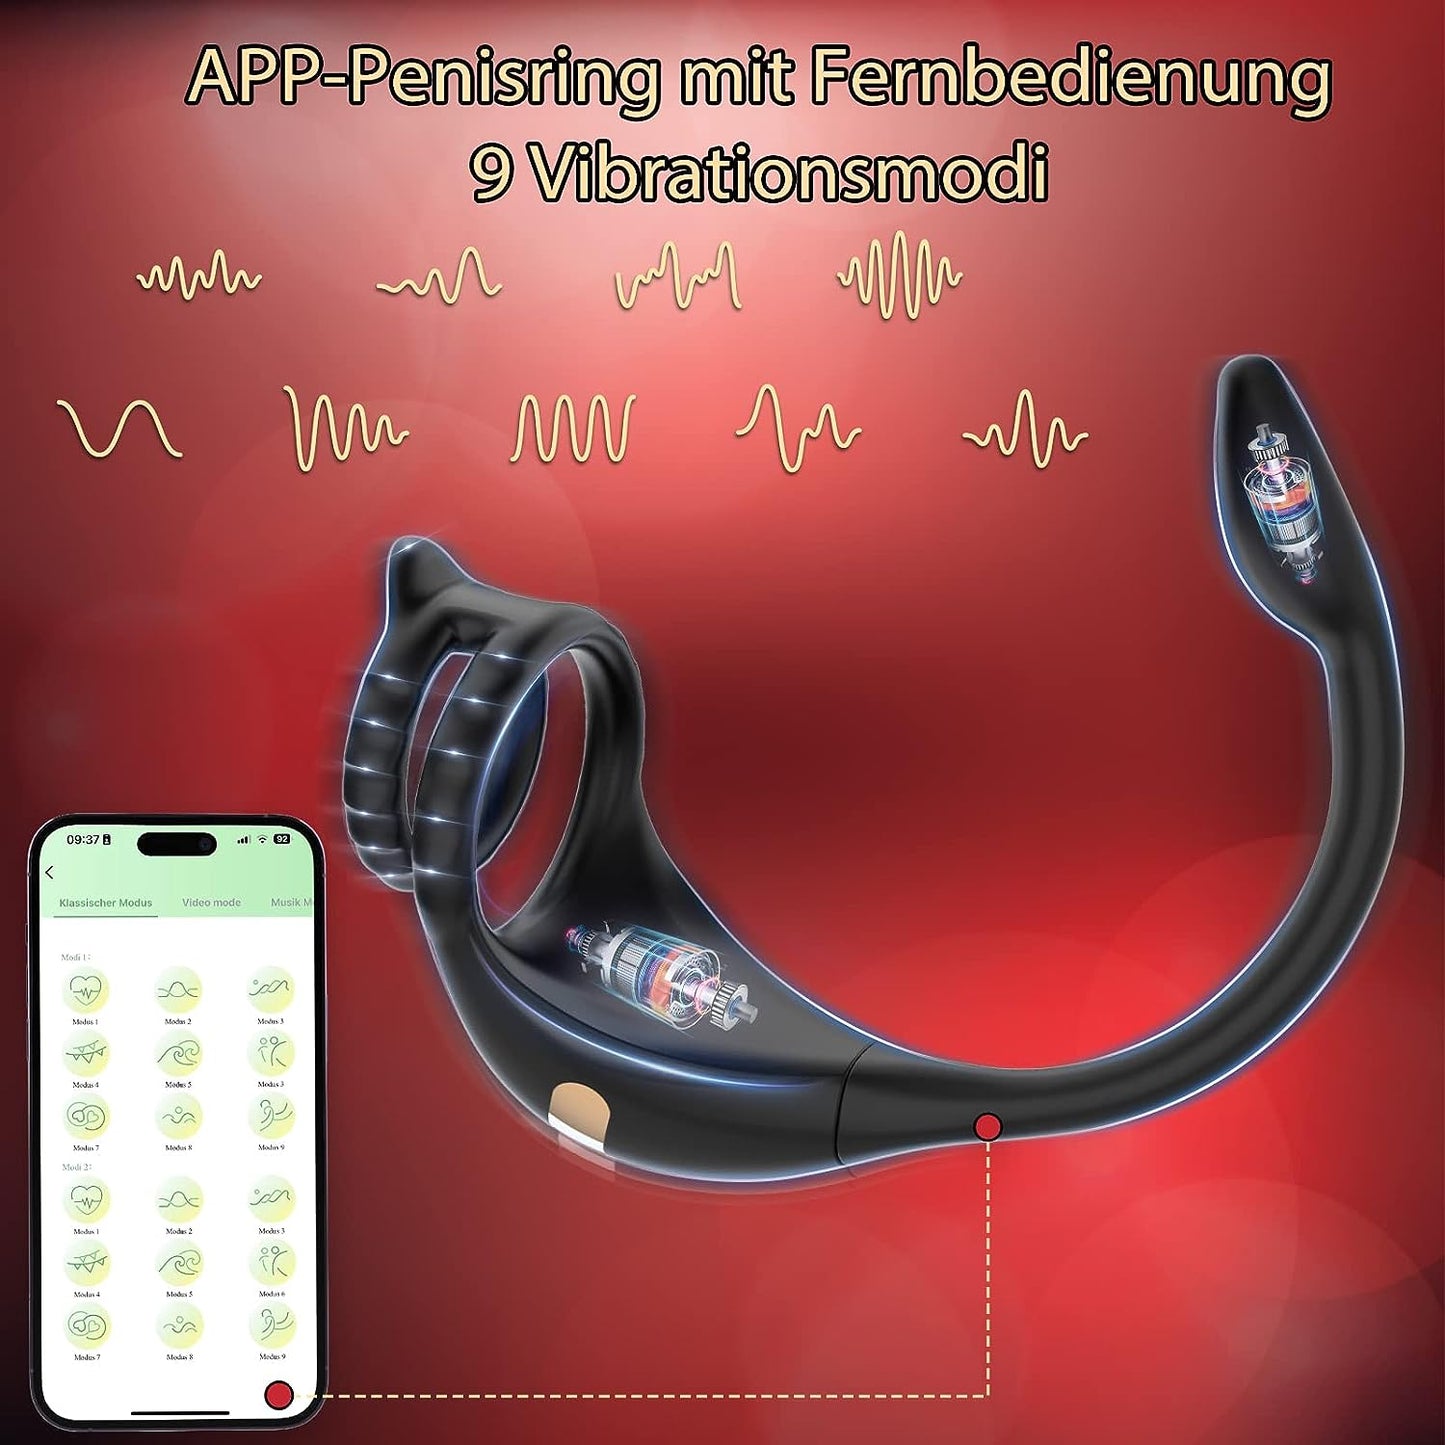 Penis ring prostate massager APP control with 10 vibration modes 